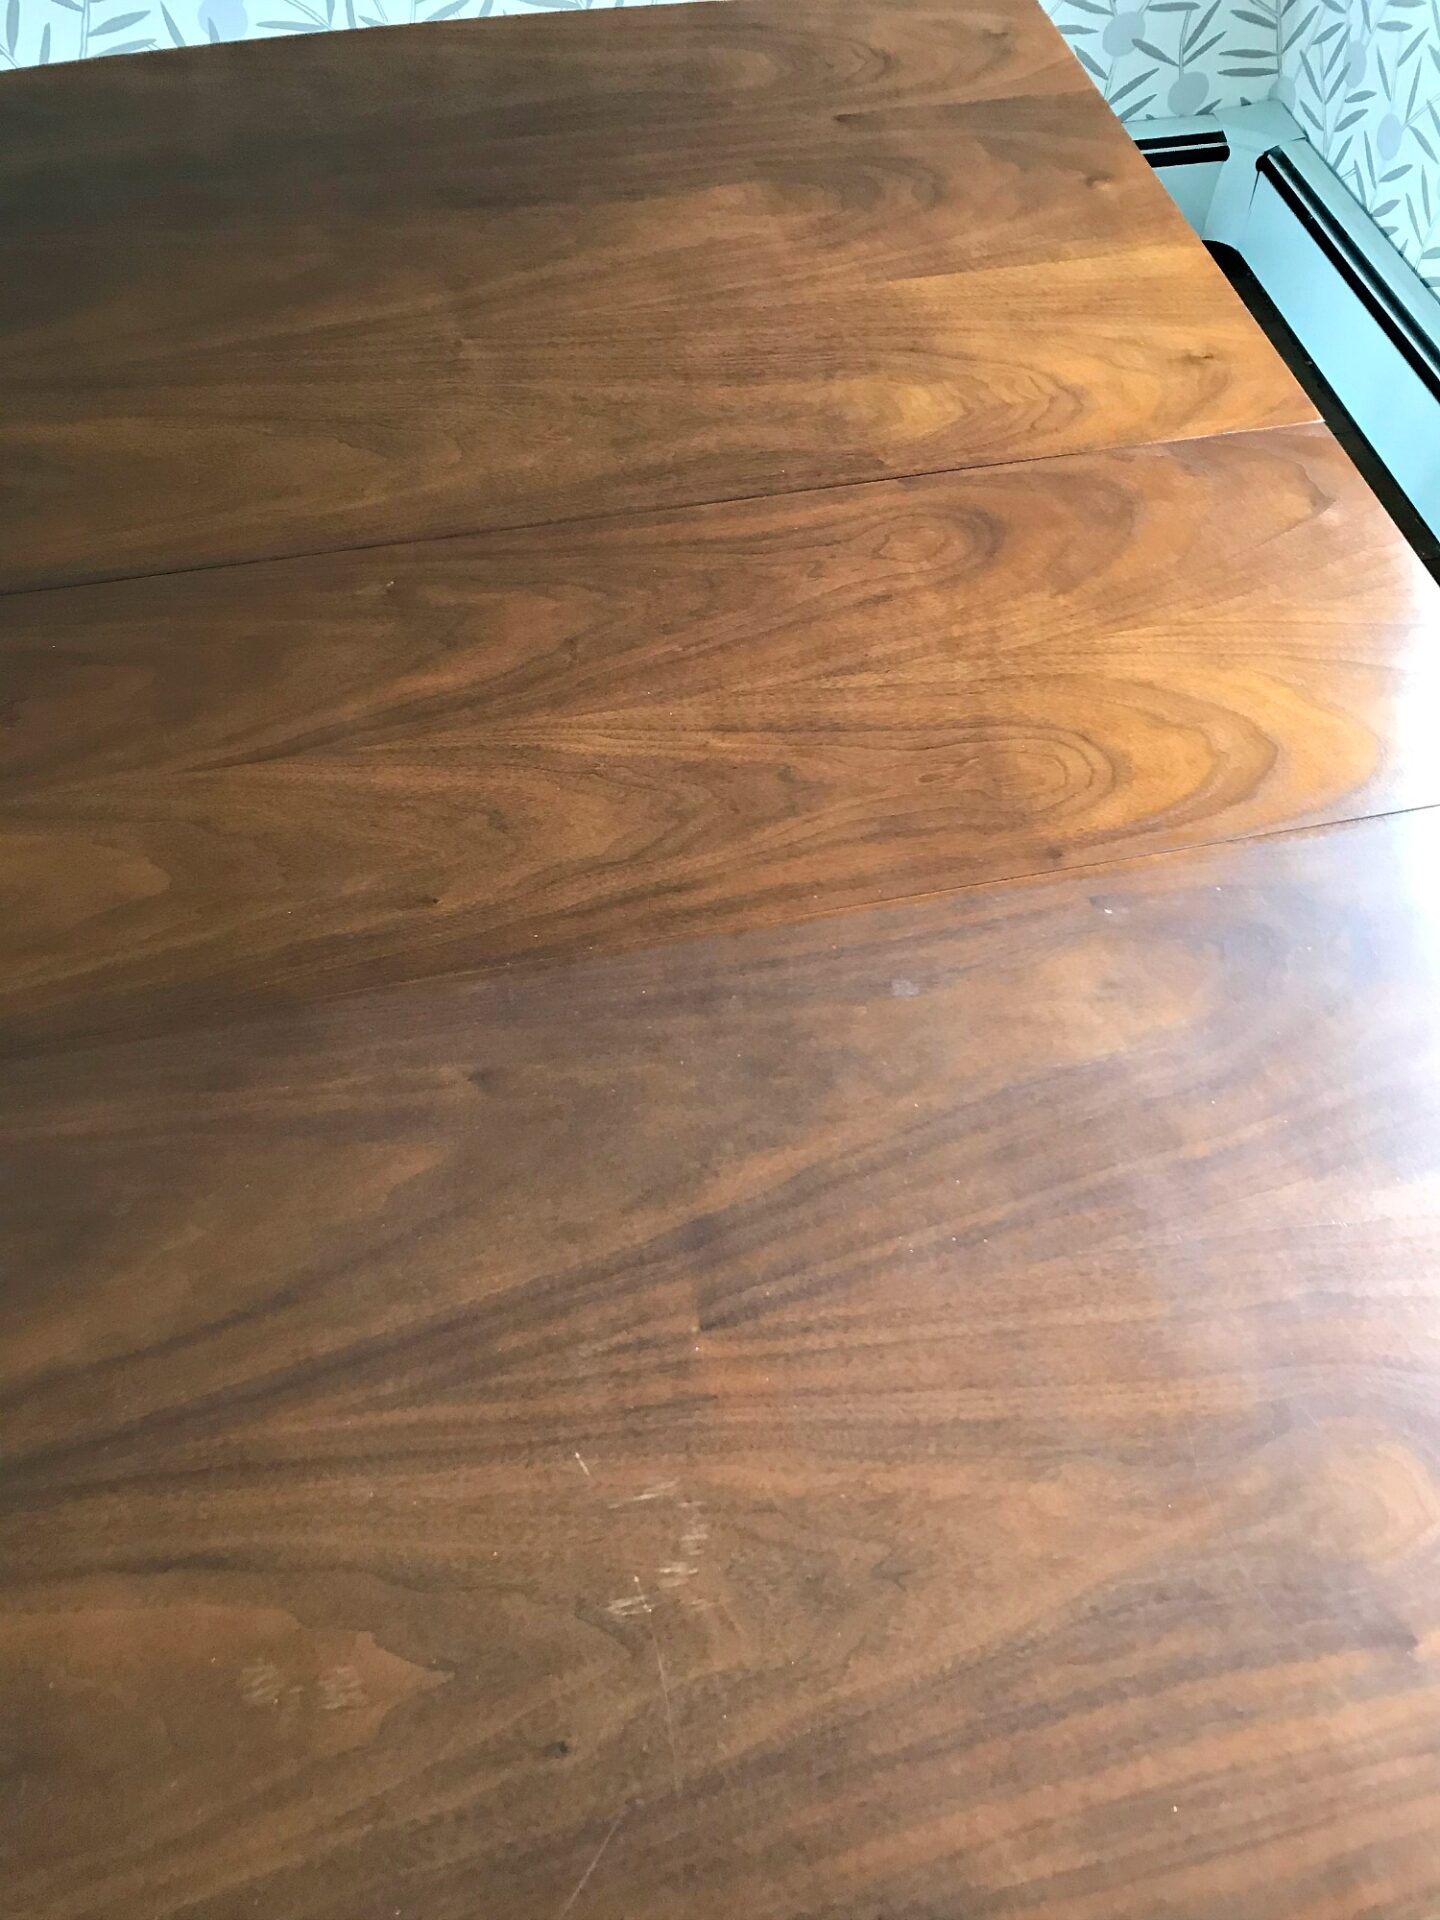 How to revive wood without refinishing